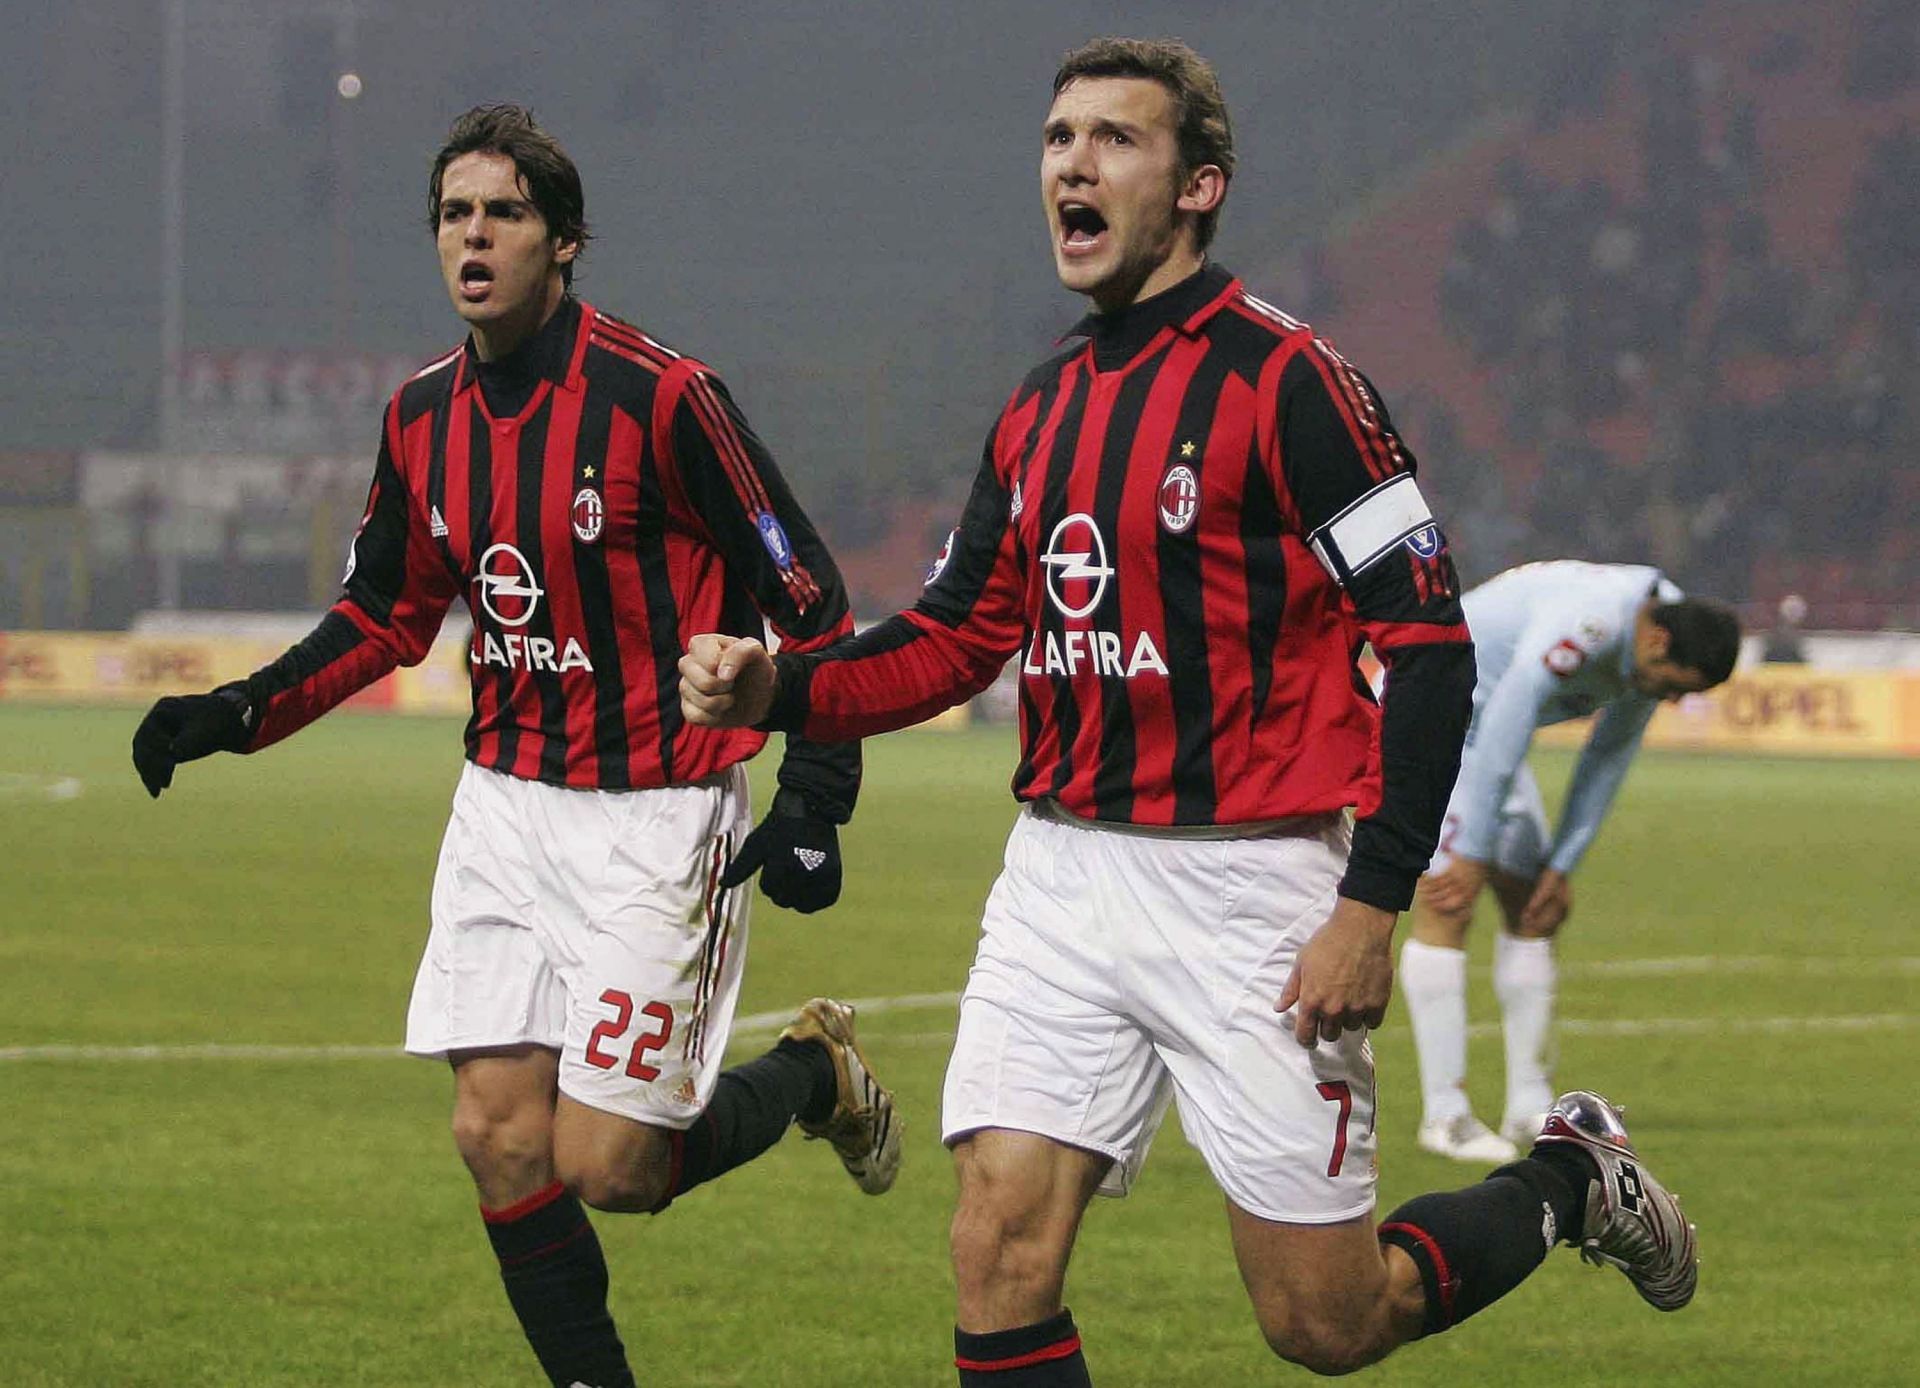 Andriy Shevchenko and Kaka were a delight to watch when they played for AC Milan